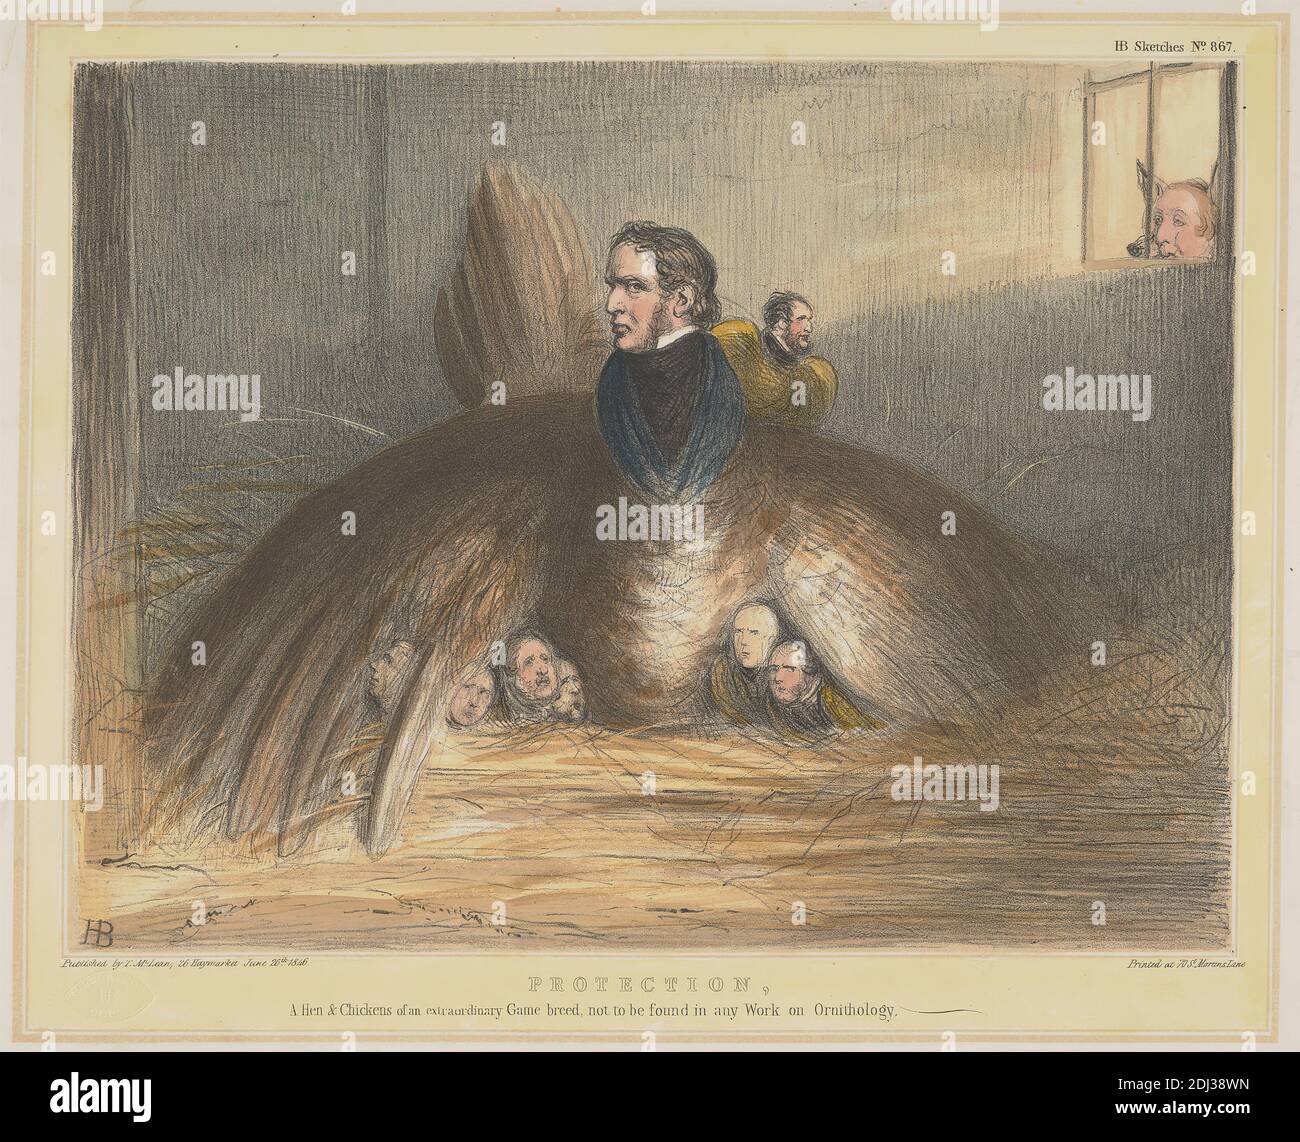 Protection, A Hen and Chickens of an Extraordinary Game Breed, not to be found in any work on Ornithology (from: Caricature, Vol. 6), John Doyle ('H.B.'), 1797–1868, Irish, 1846, Lithograph, Hand-colored, Sheet: 9 x 11 3/4in. (22.9 x 29,8 cm Stockfoto